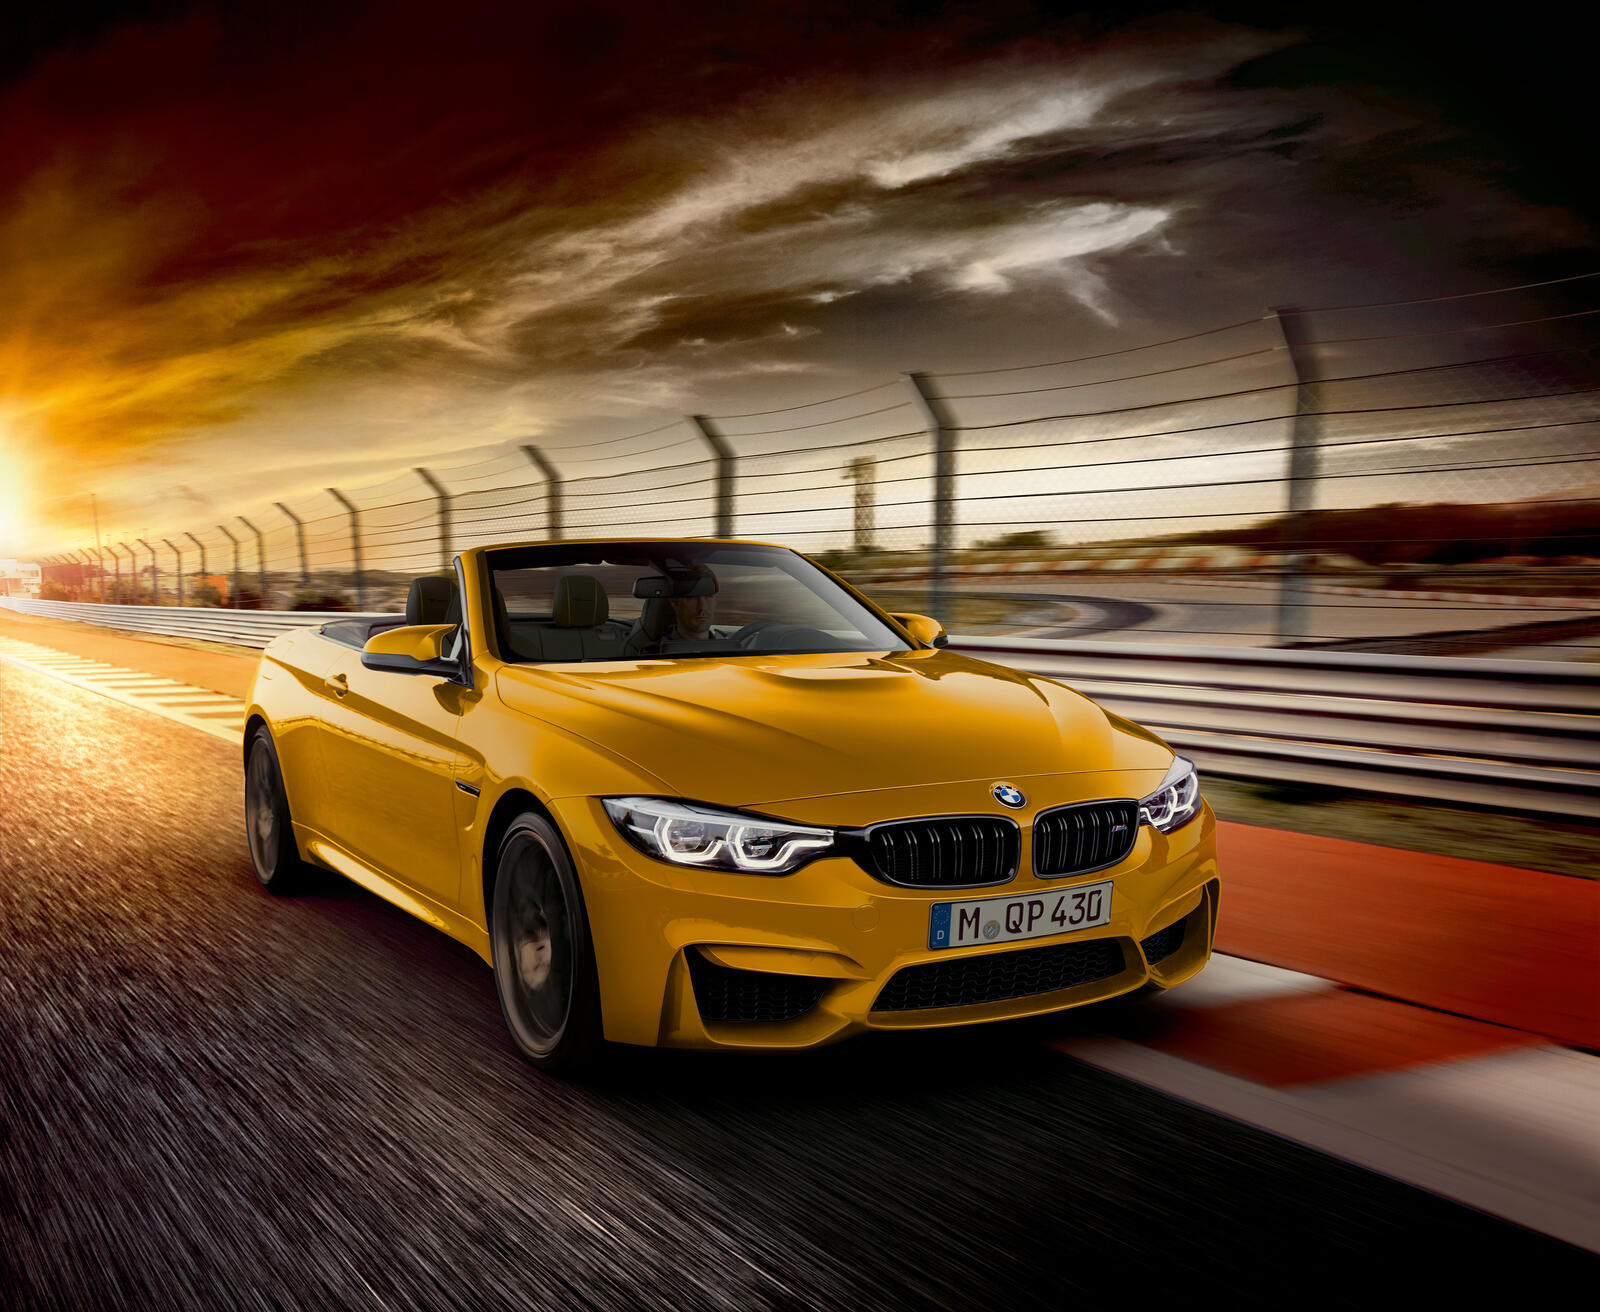 Wallpapers BMW M4 convertible yellow on the desktop